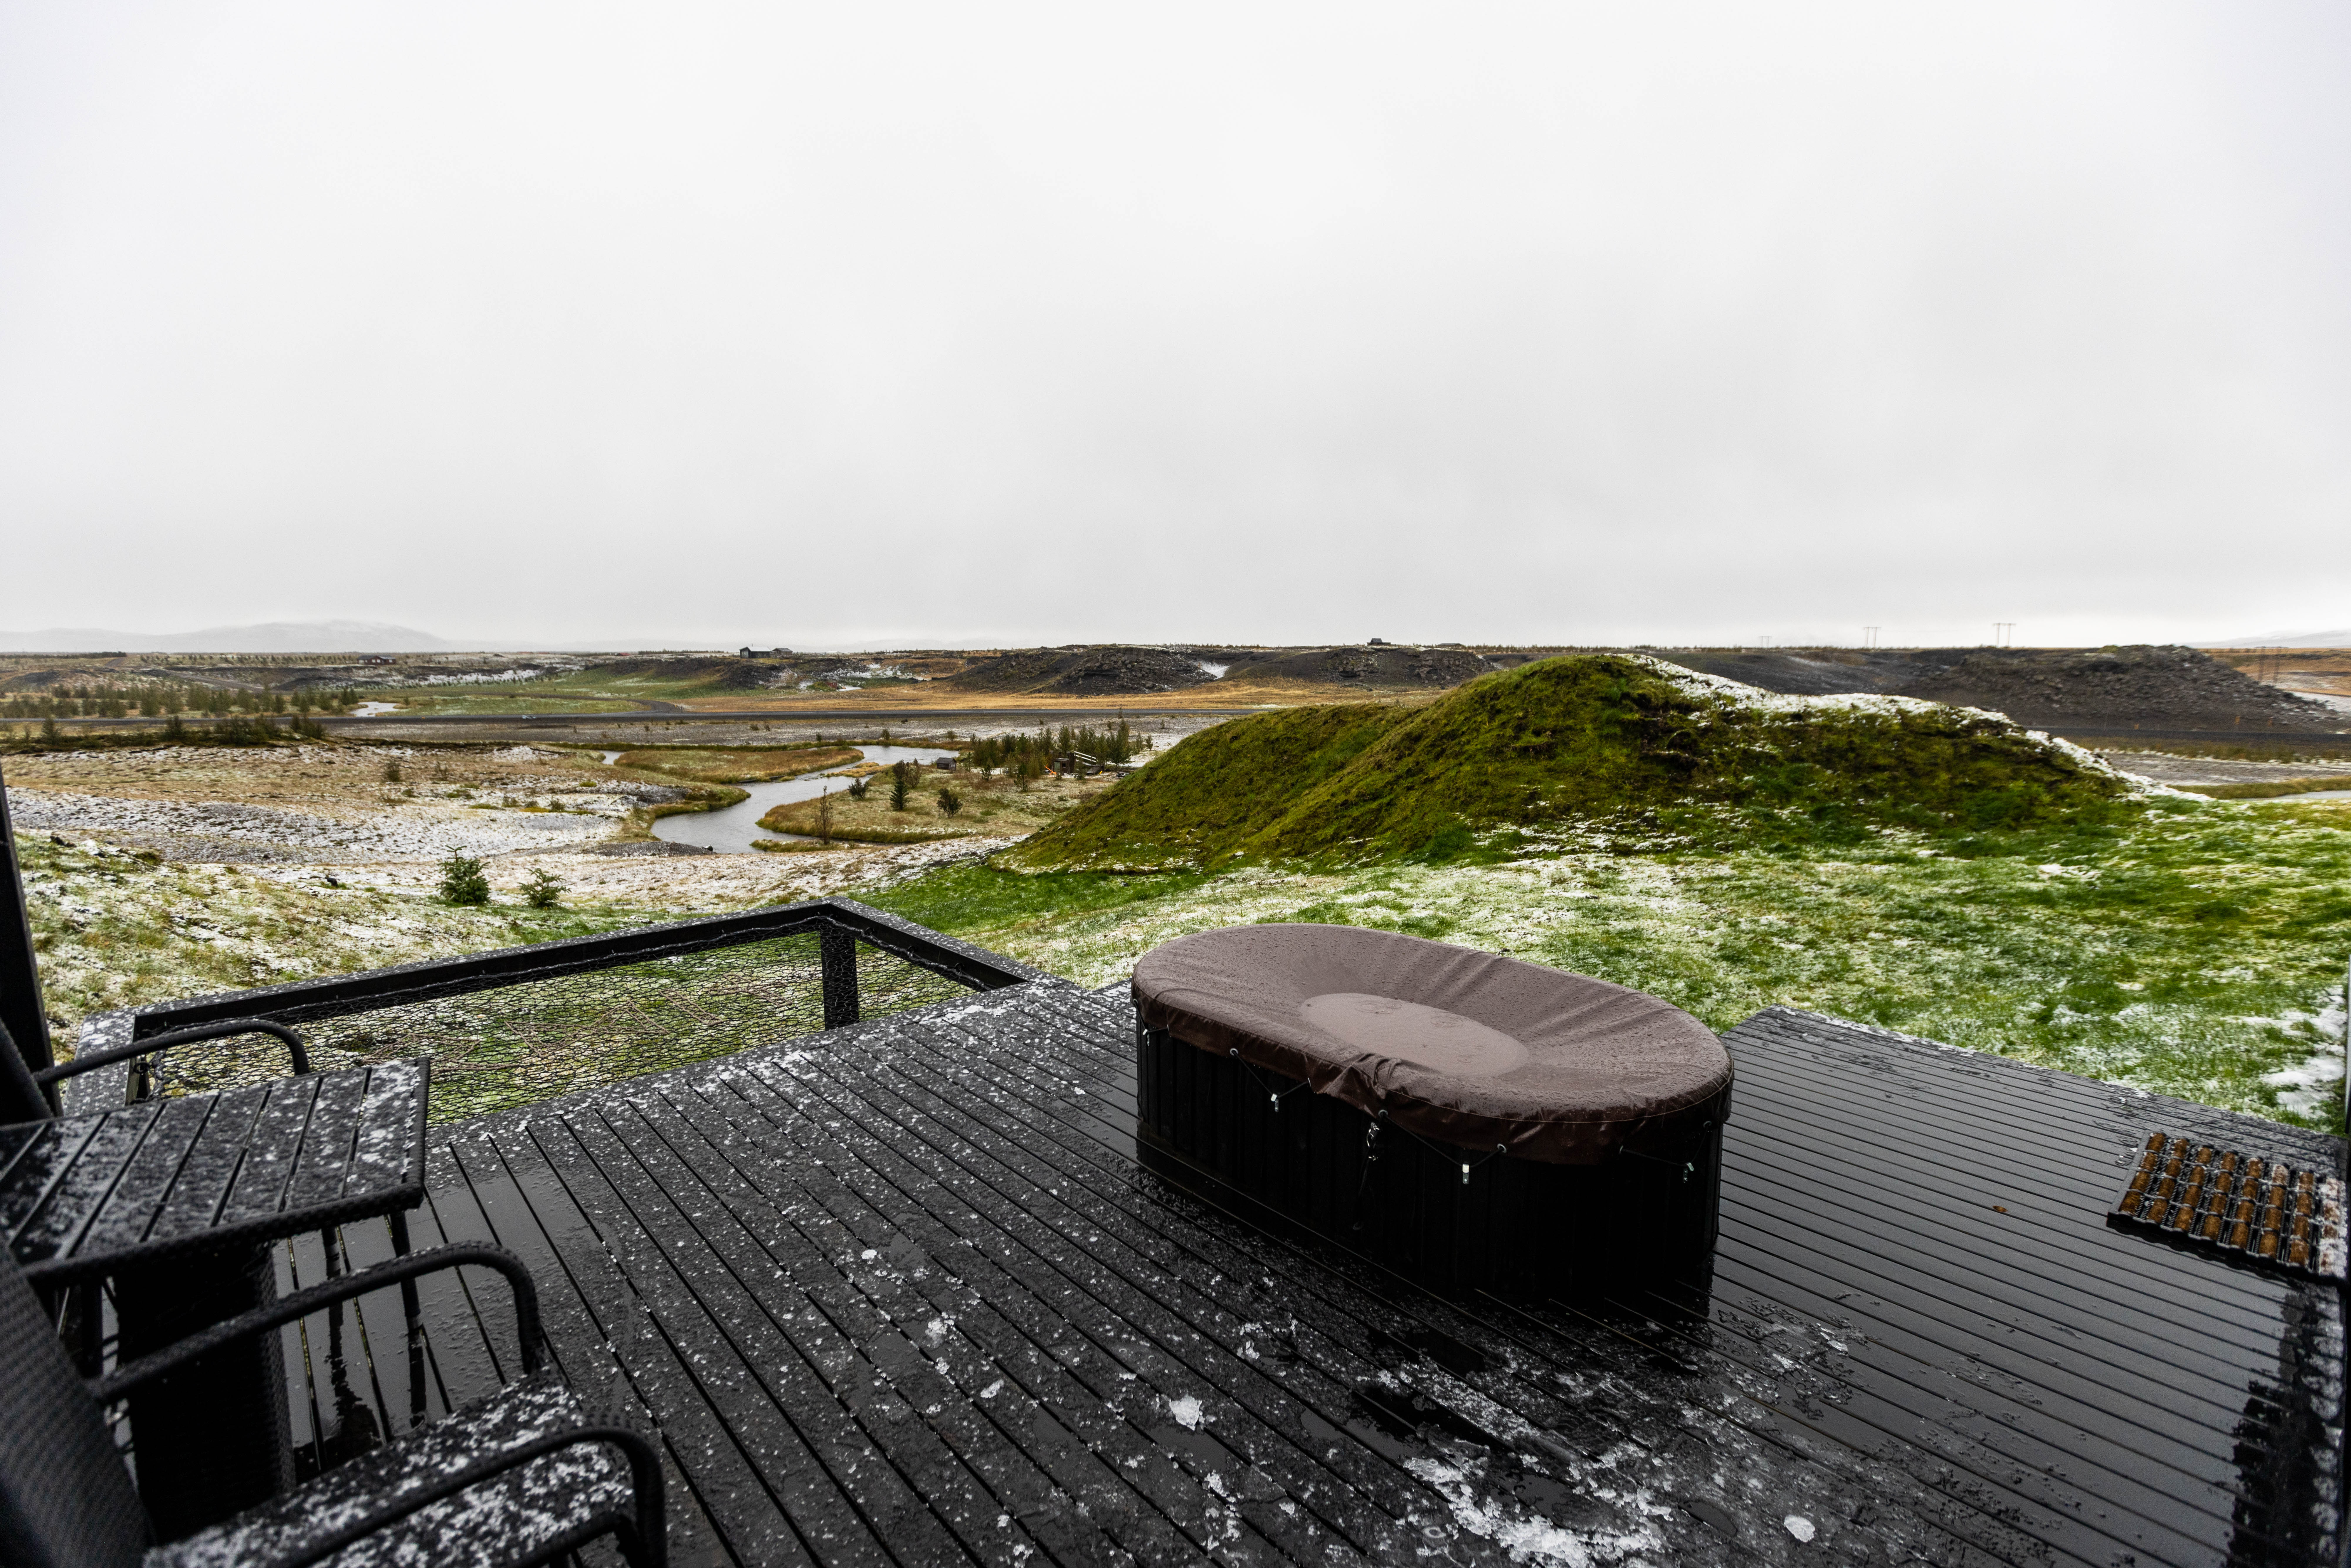 The outdoor hot tub of the the Odin Panorama Glass Lodge in Iceland.